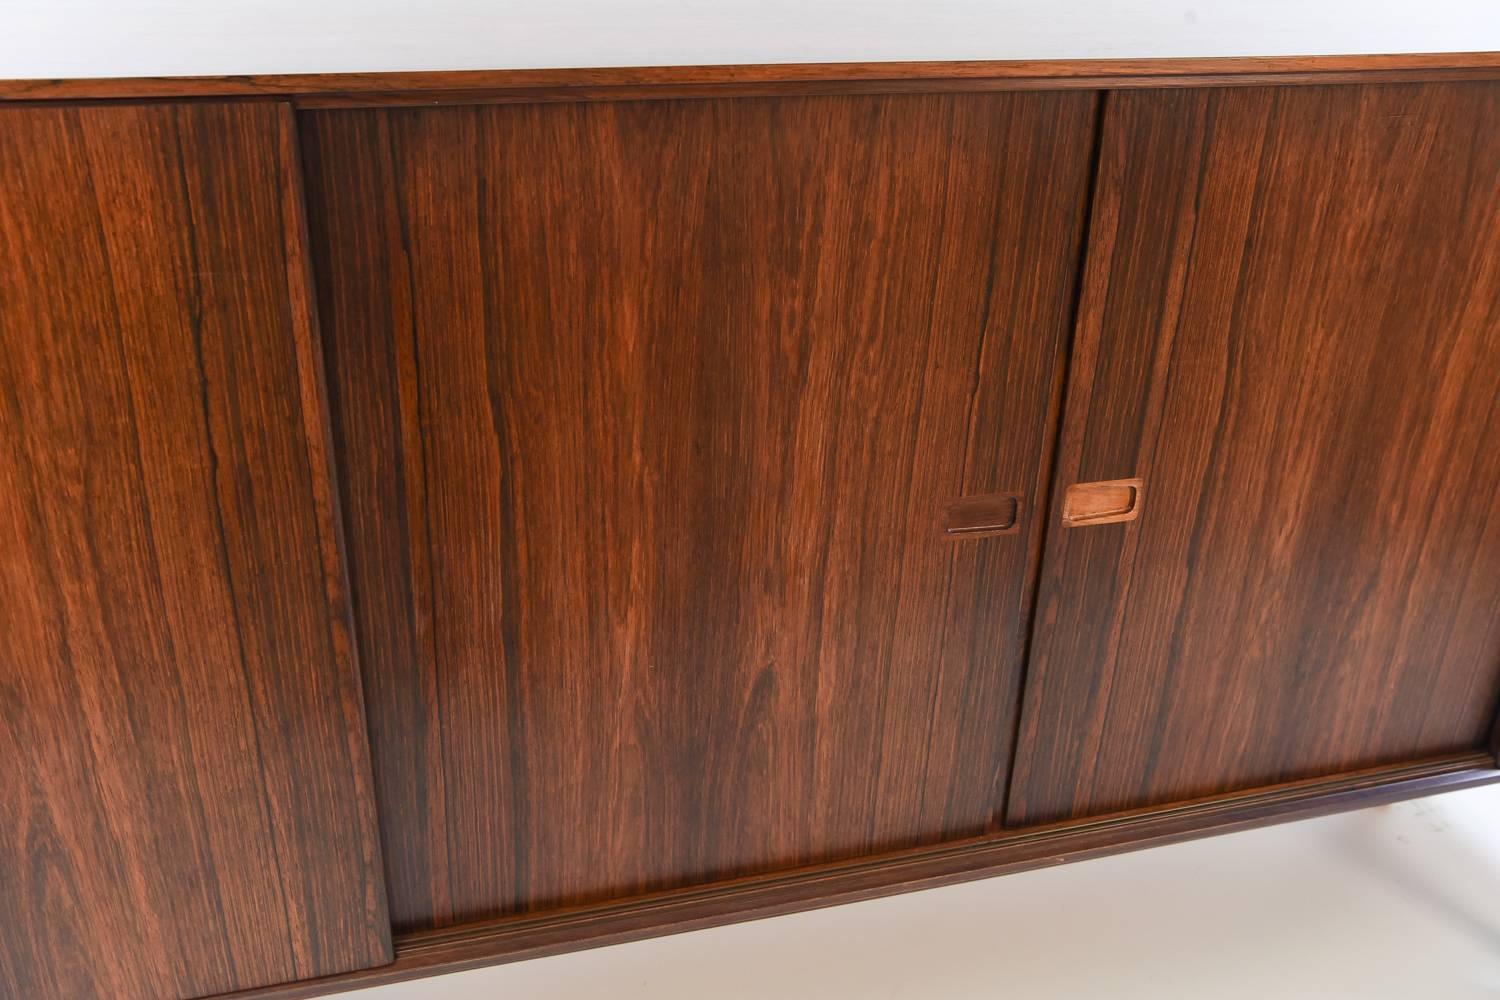 This sideboard by Arne Vodder features stunning rosewood with a beautiful grain and color. Small recessed handles adorn the sliding doors.